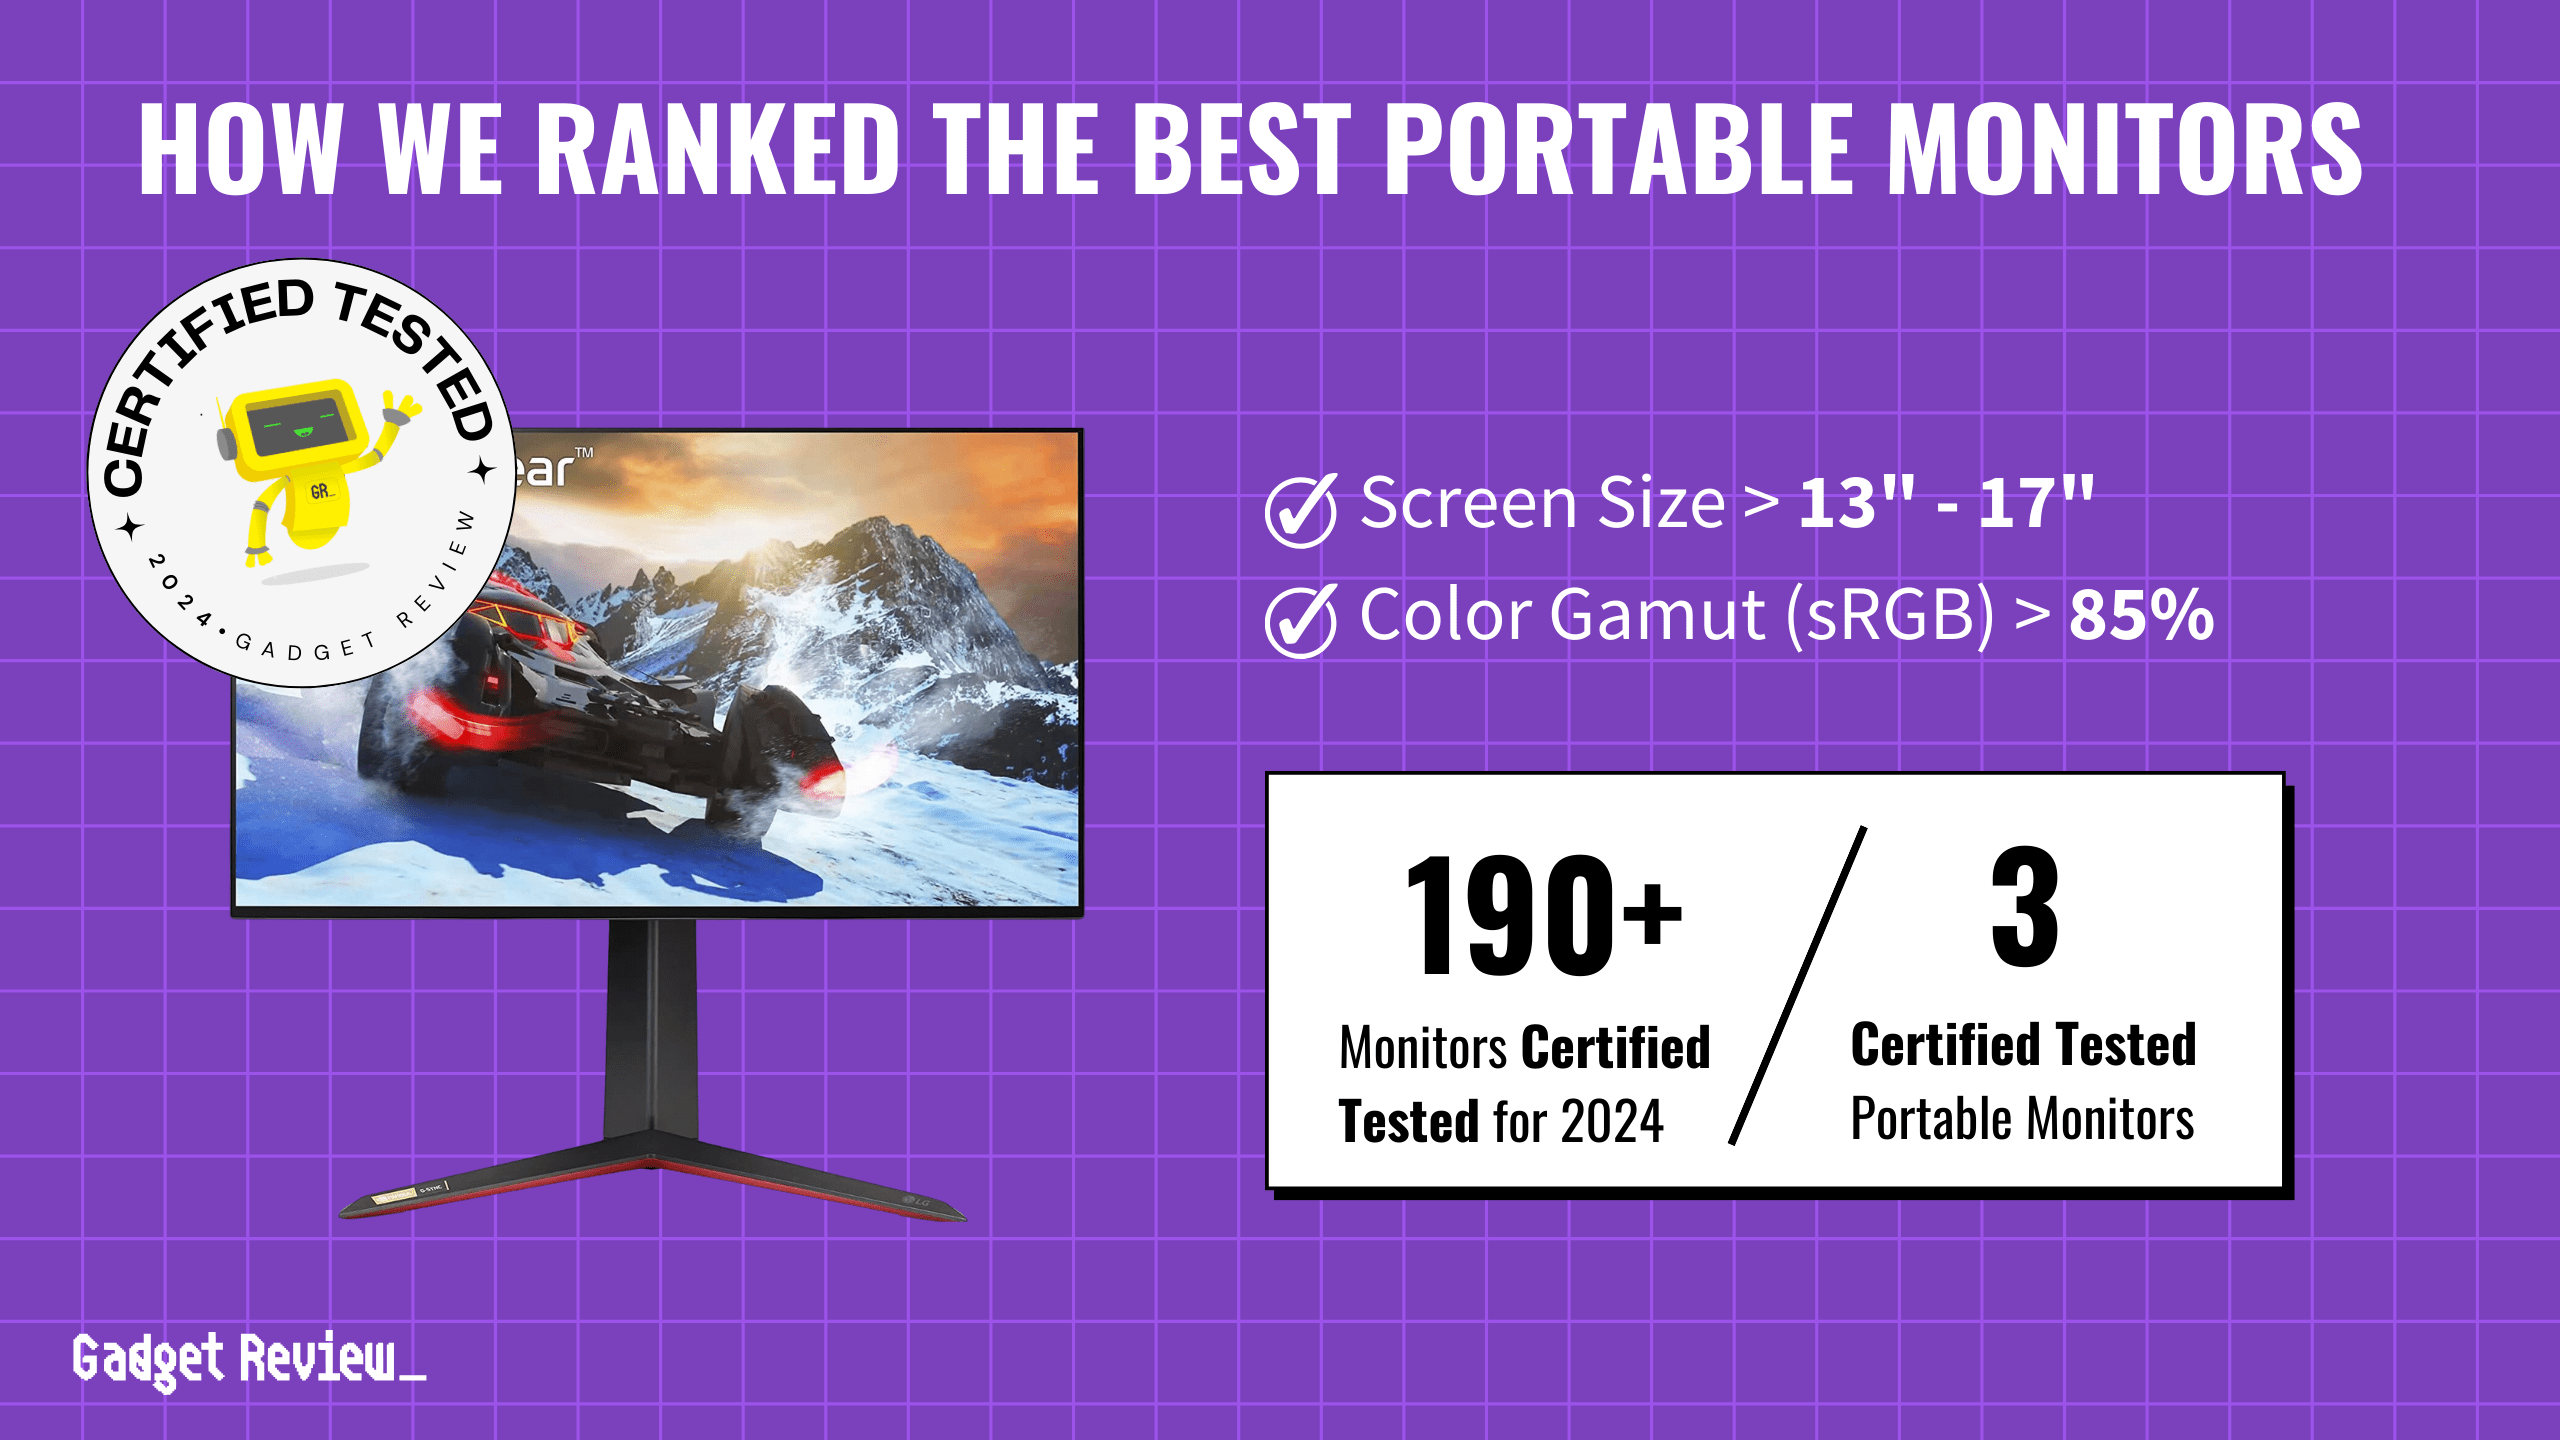 What’s the Best Portable Monitor? 3 Options Ranked